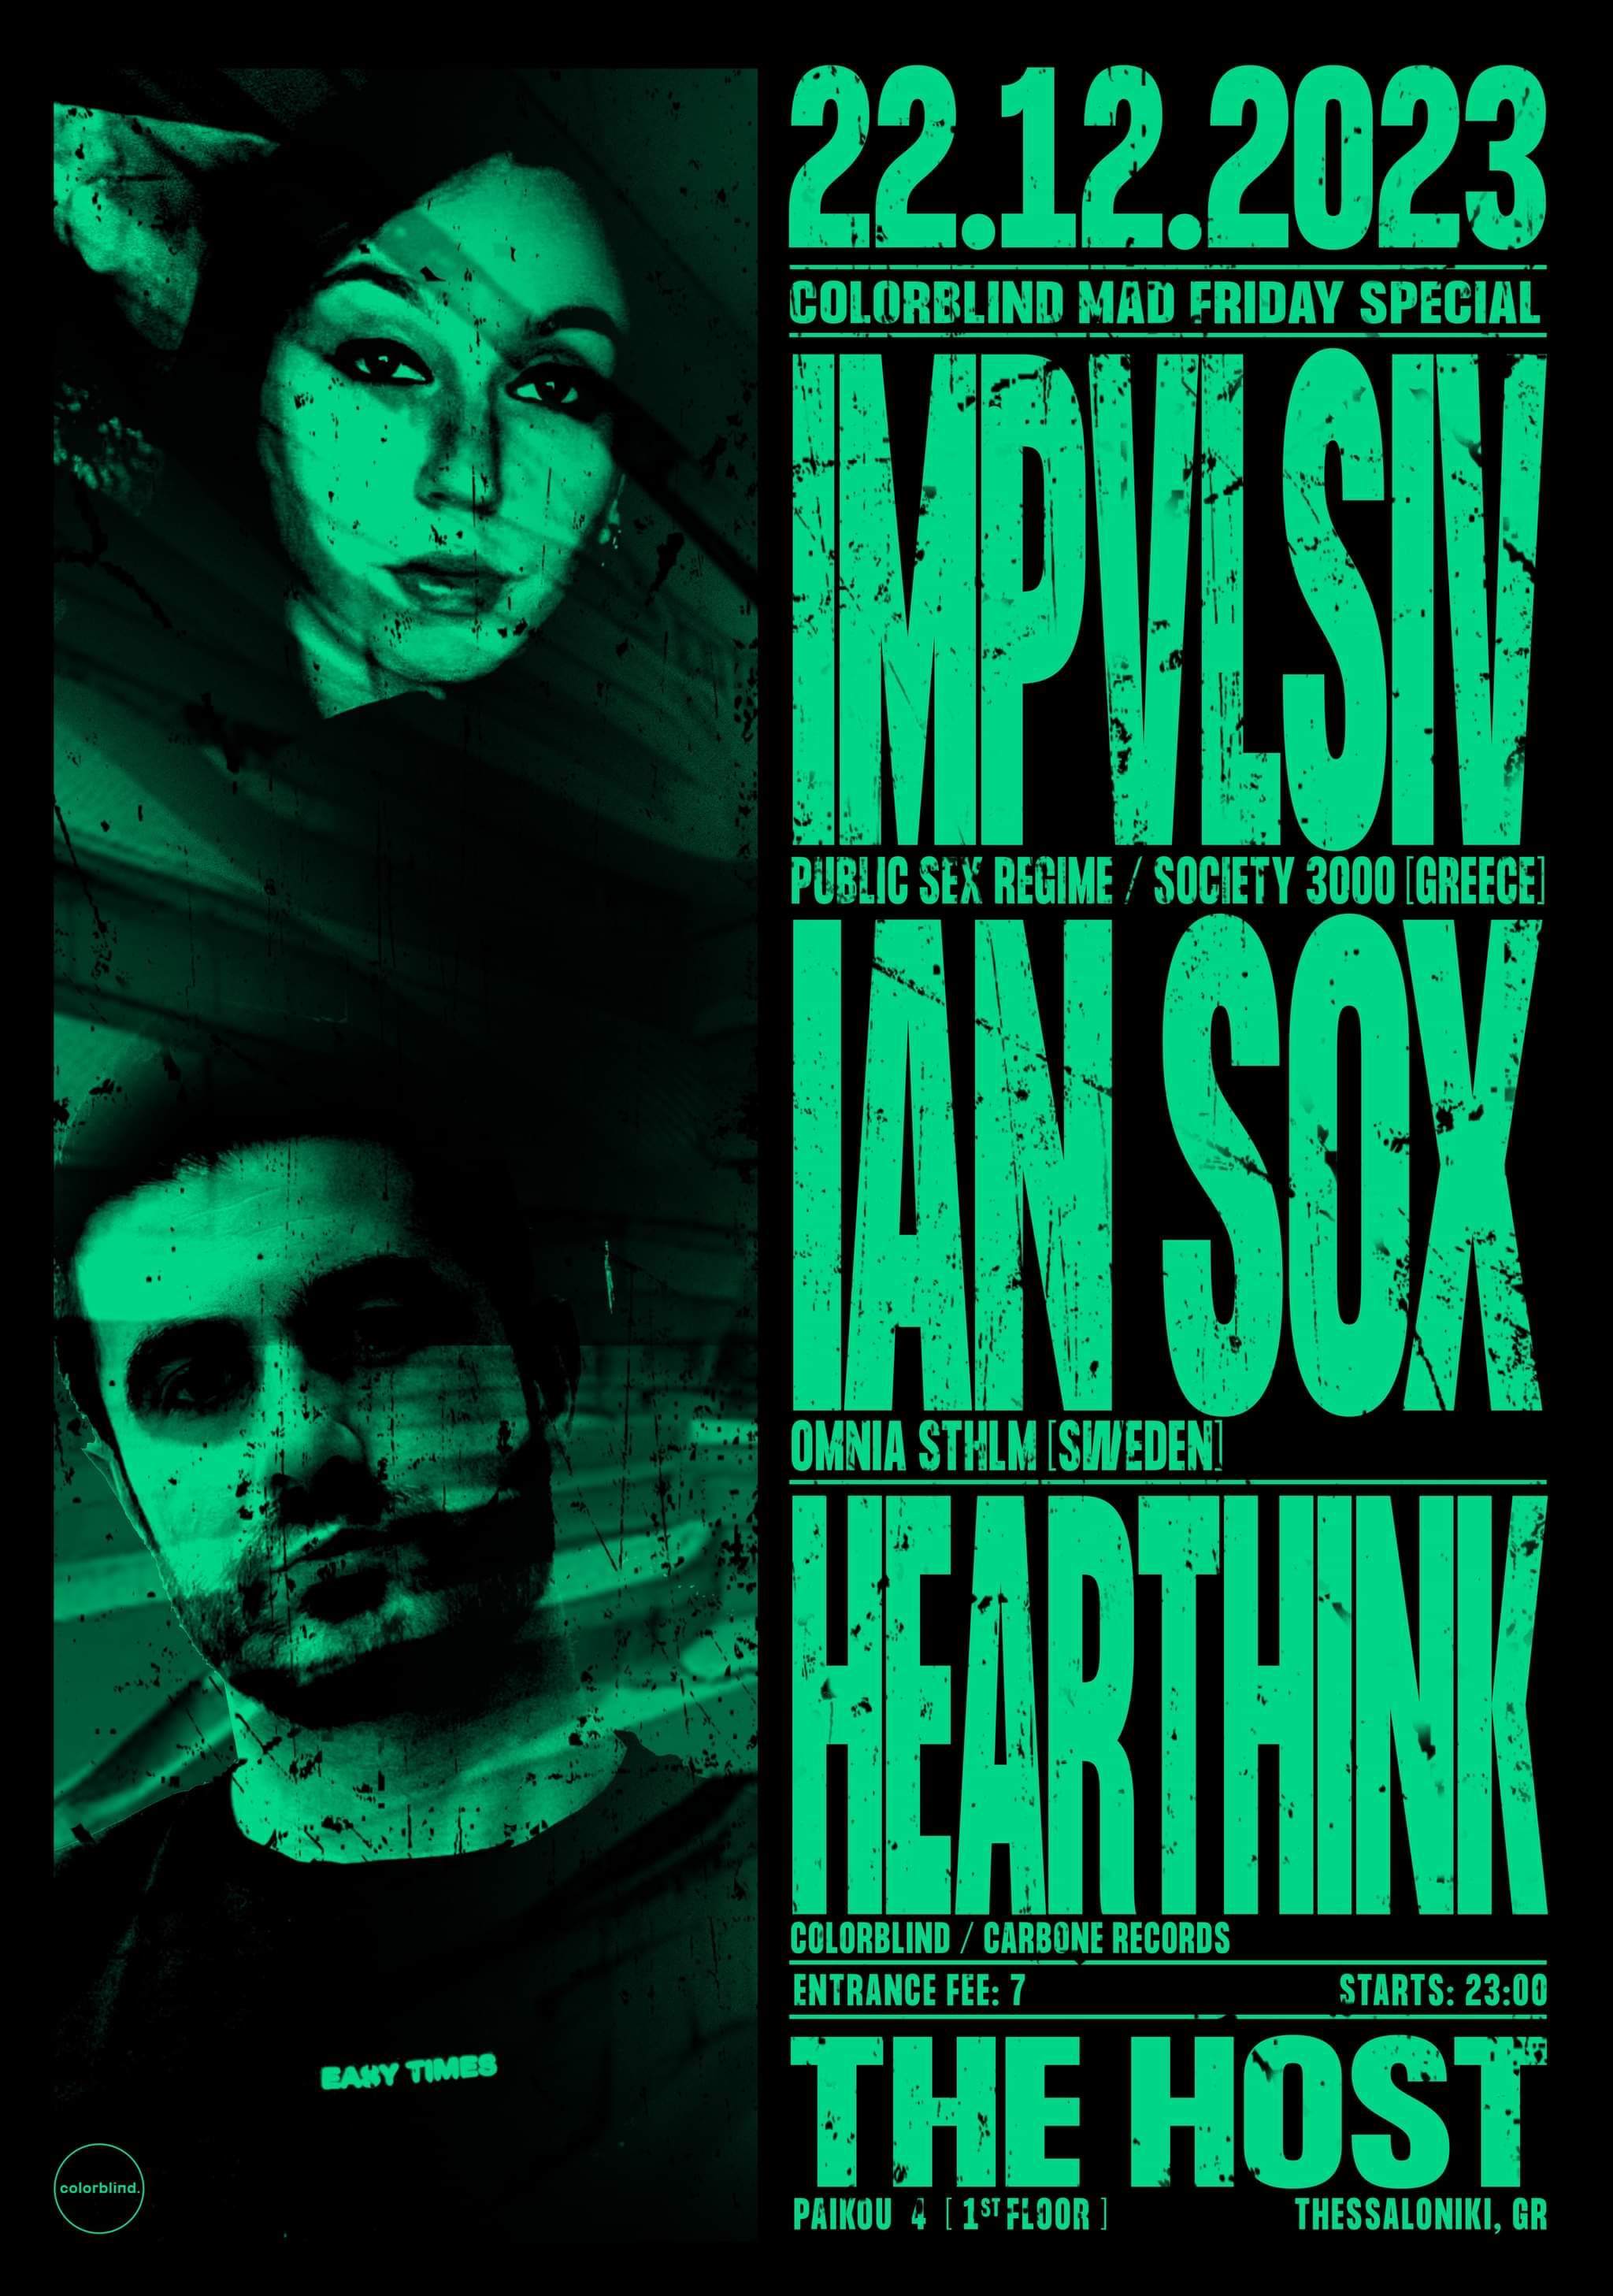 Colorblind MadFriday with IMPVLSIV / Ian Sox / Hearthink - フライヤー表